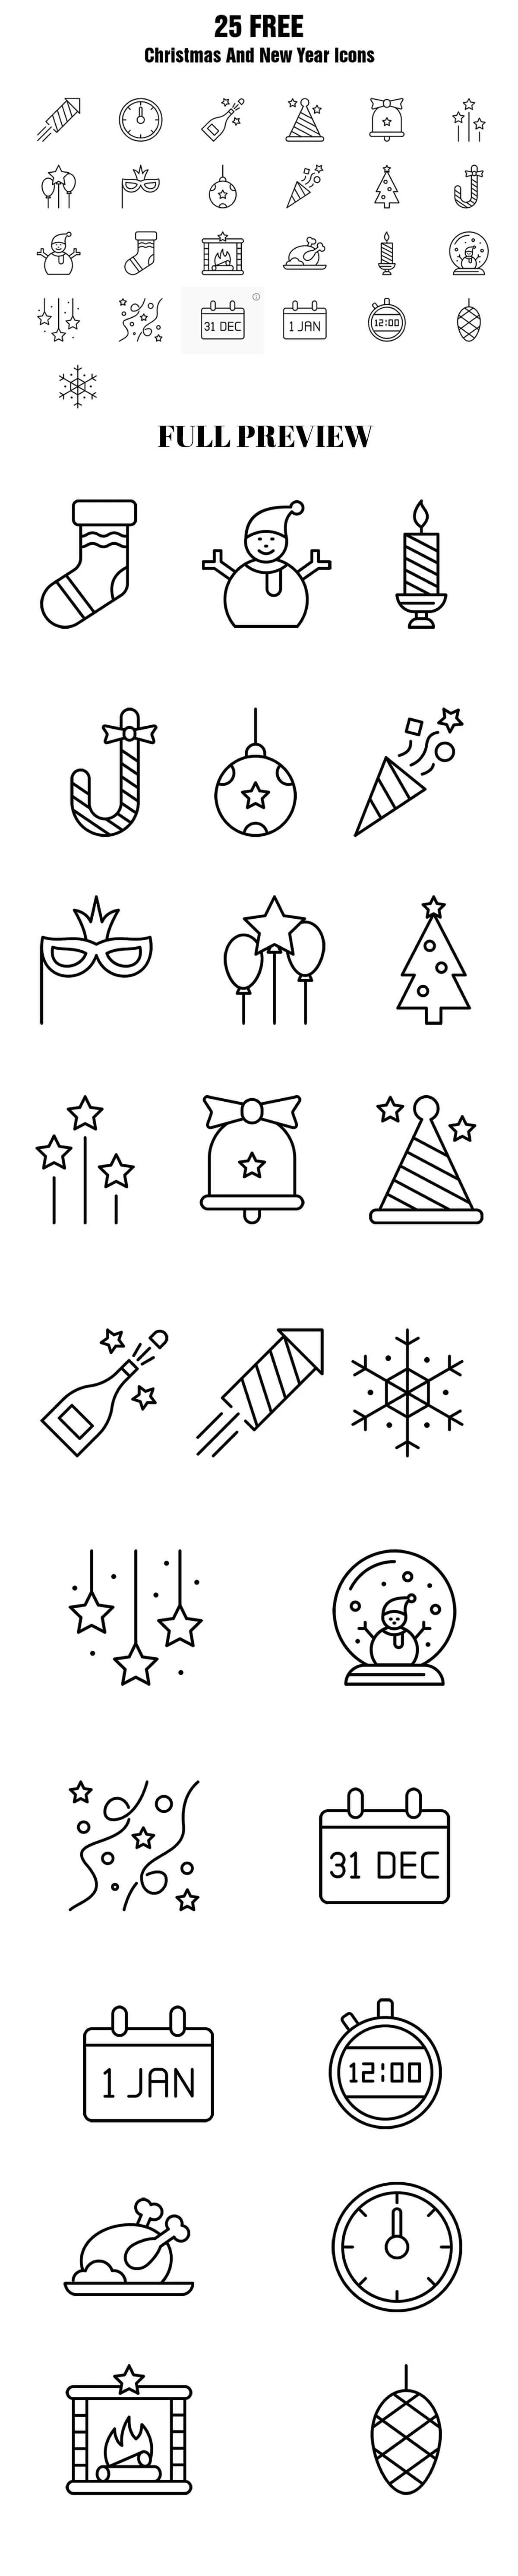 25 Christmas and New Year Icons